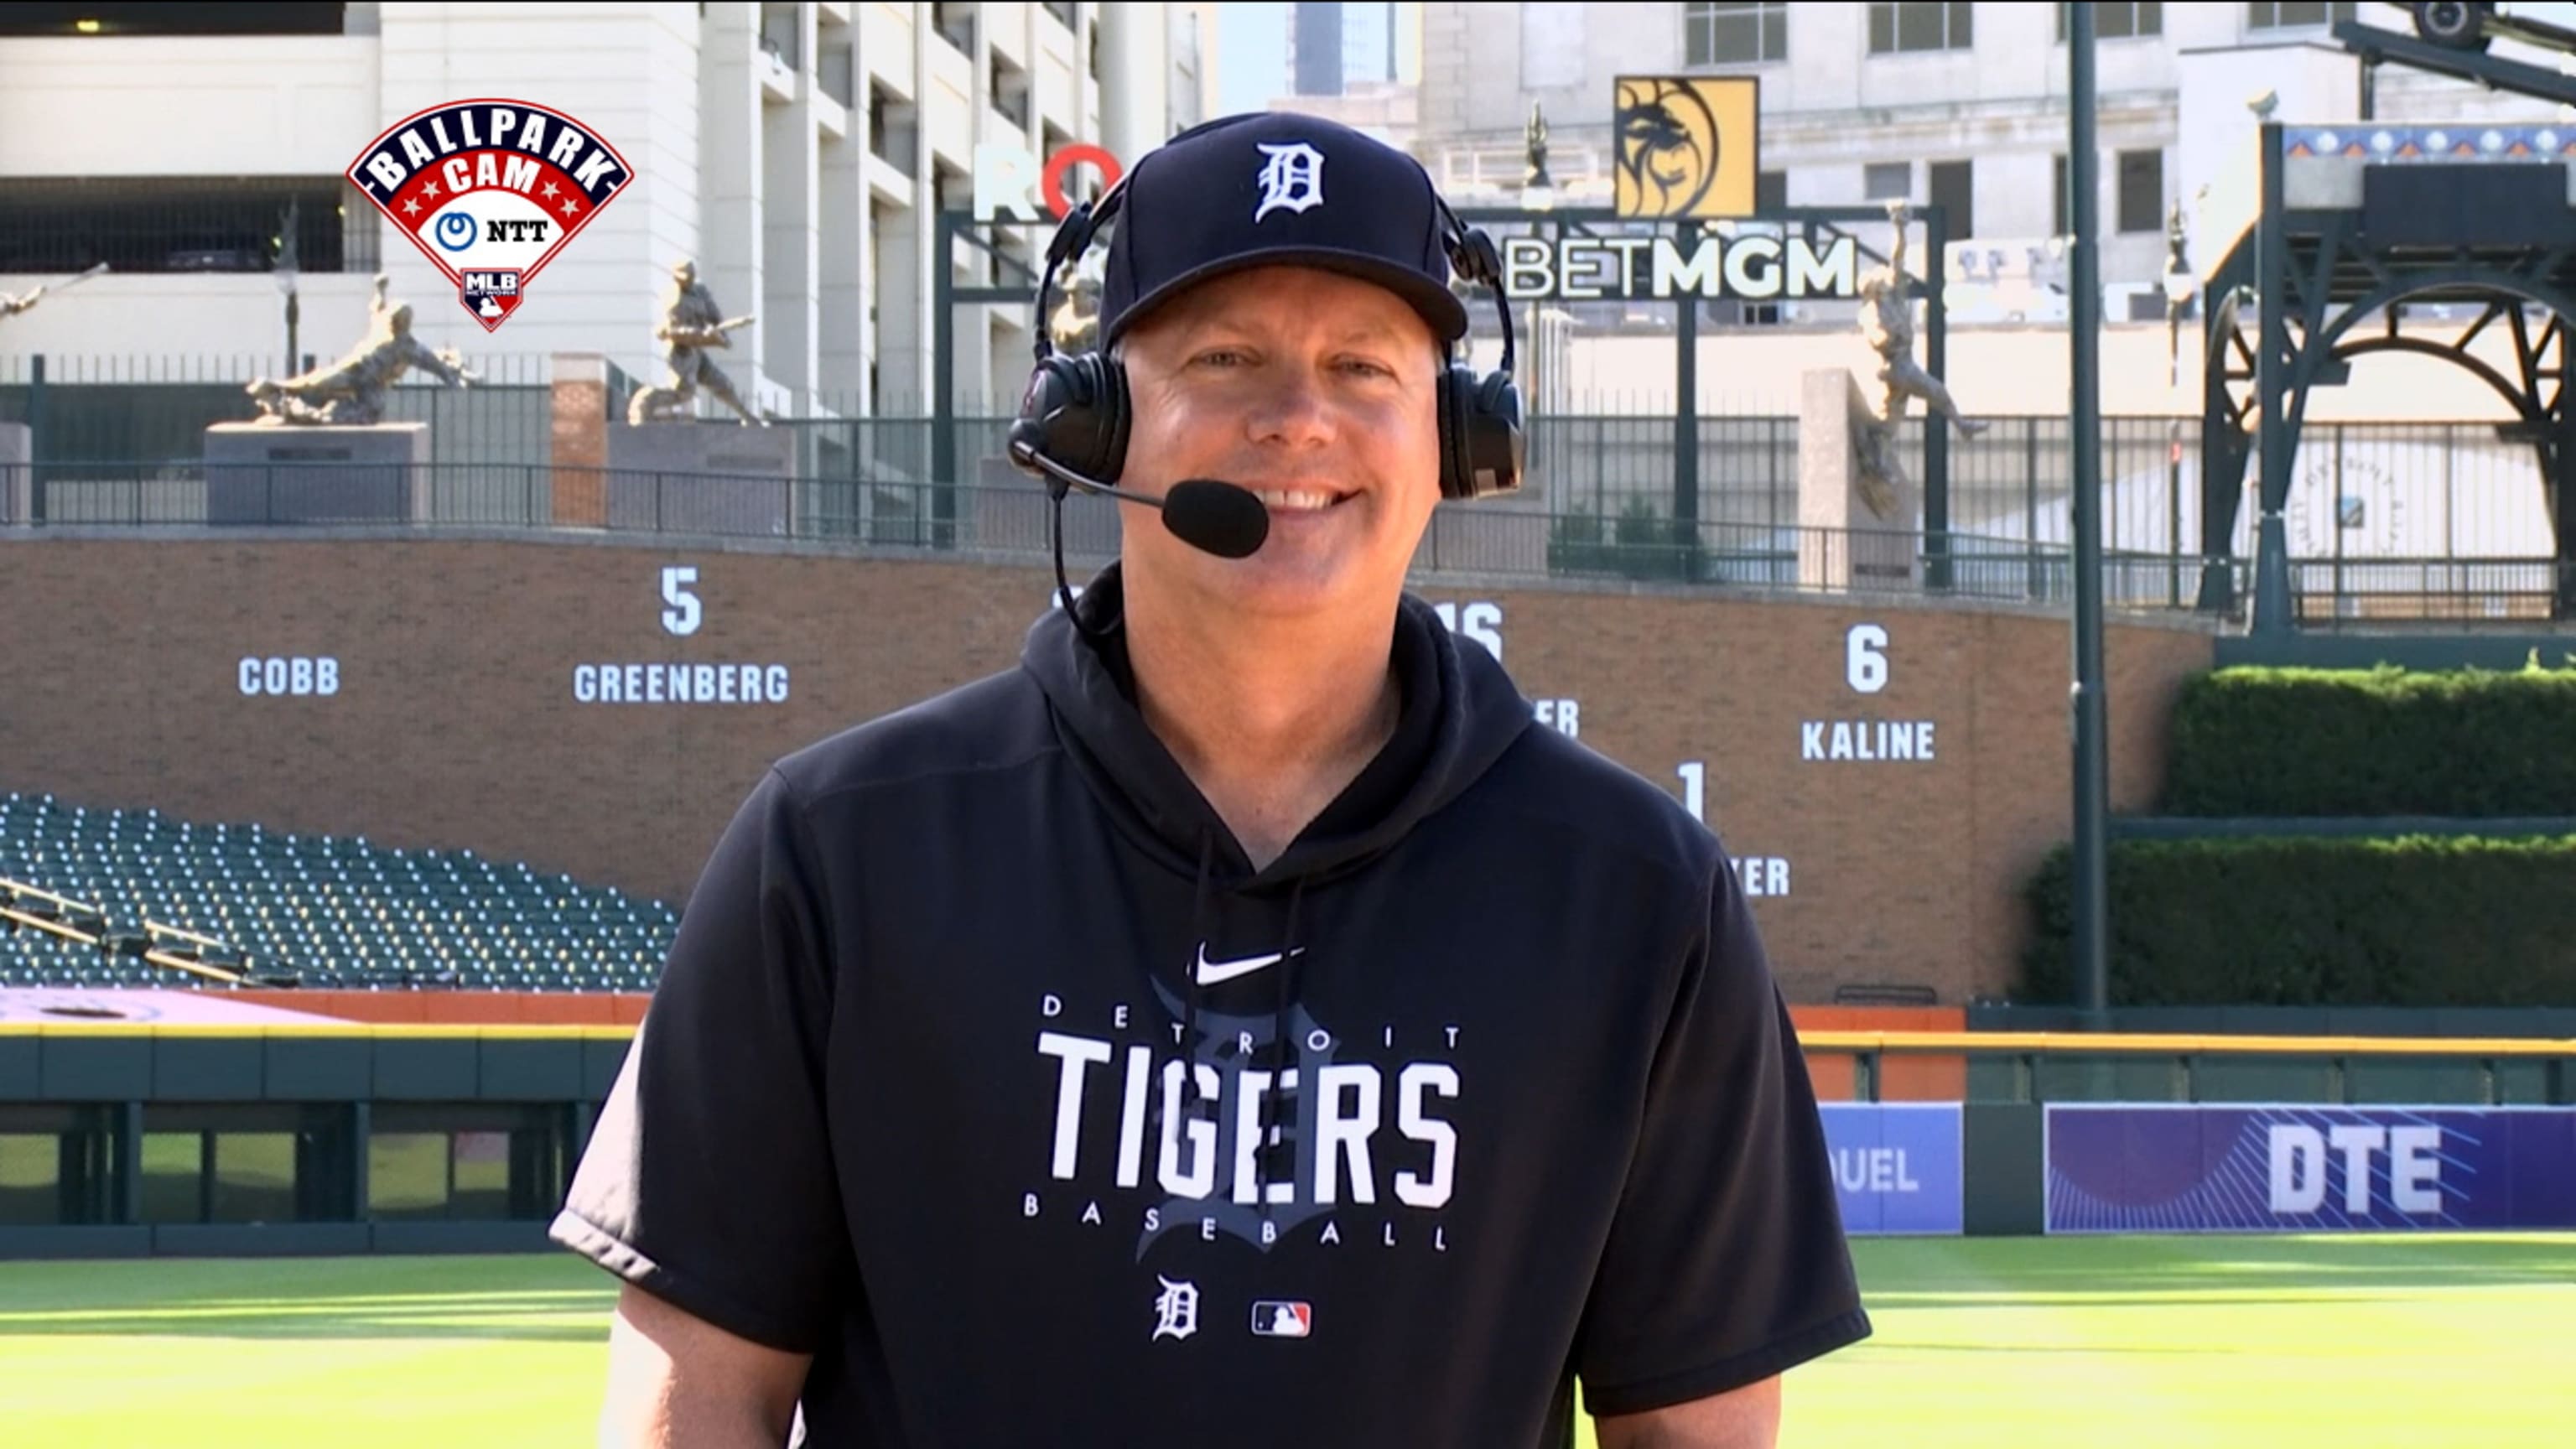 Detroit Tigers' rep for 2022 MLB All-Star game? Assessing candidates